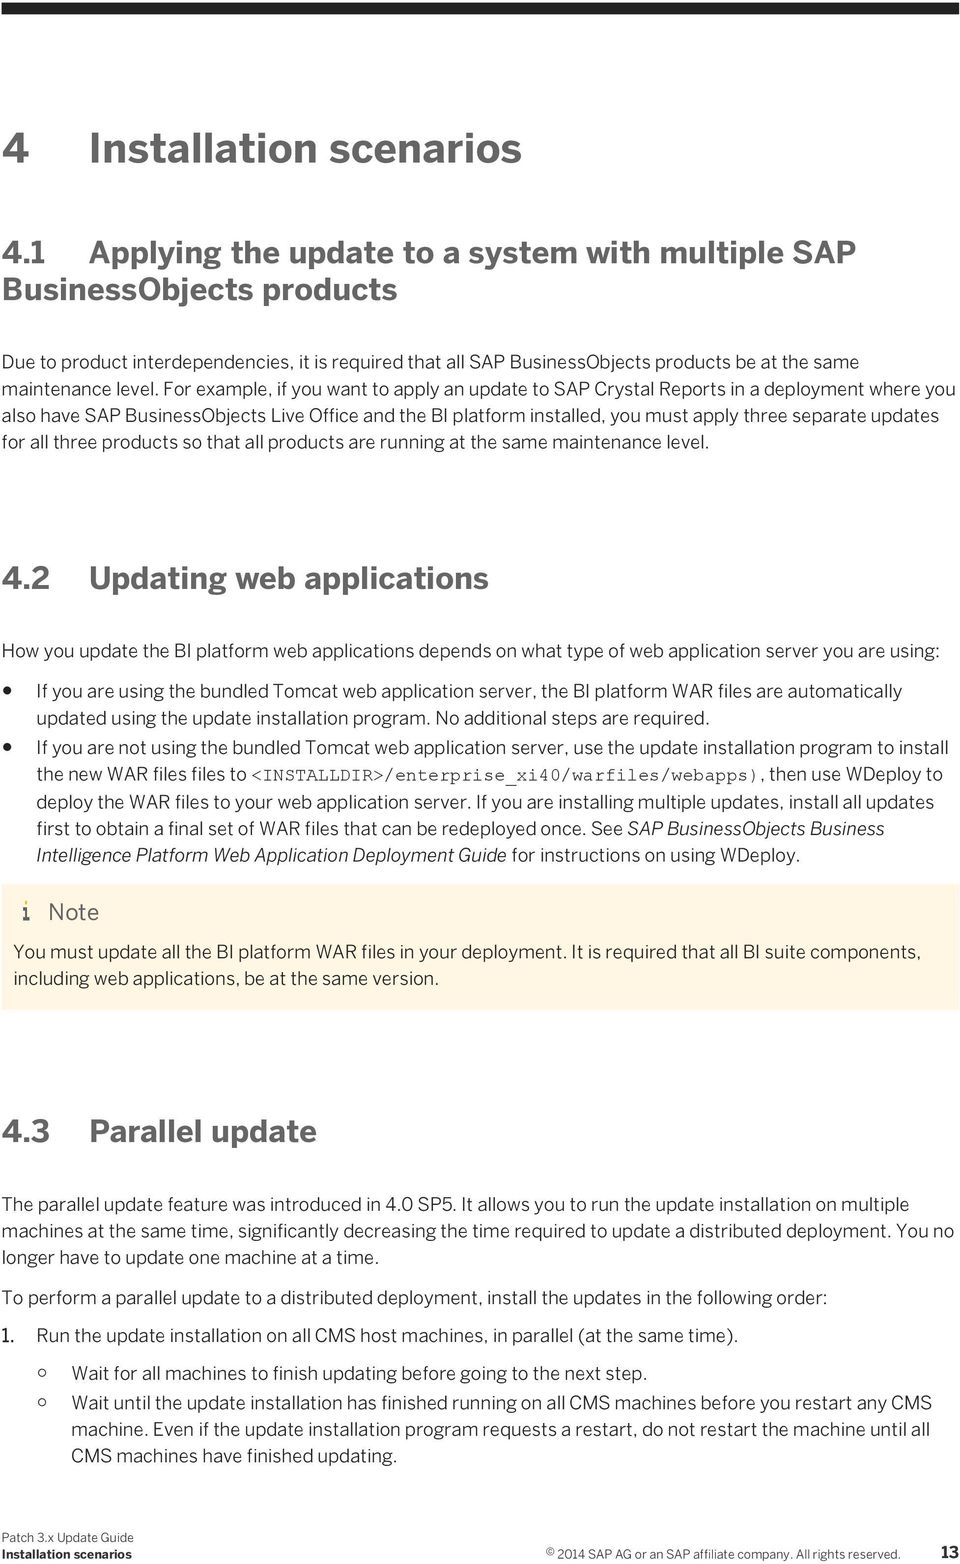 For example, if you want to apply an update to SAP Crystal Reports in a deployment where you also have SAP BusinessObjects Live Office and the BI platform installed, you must apply three separate